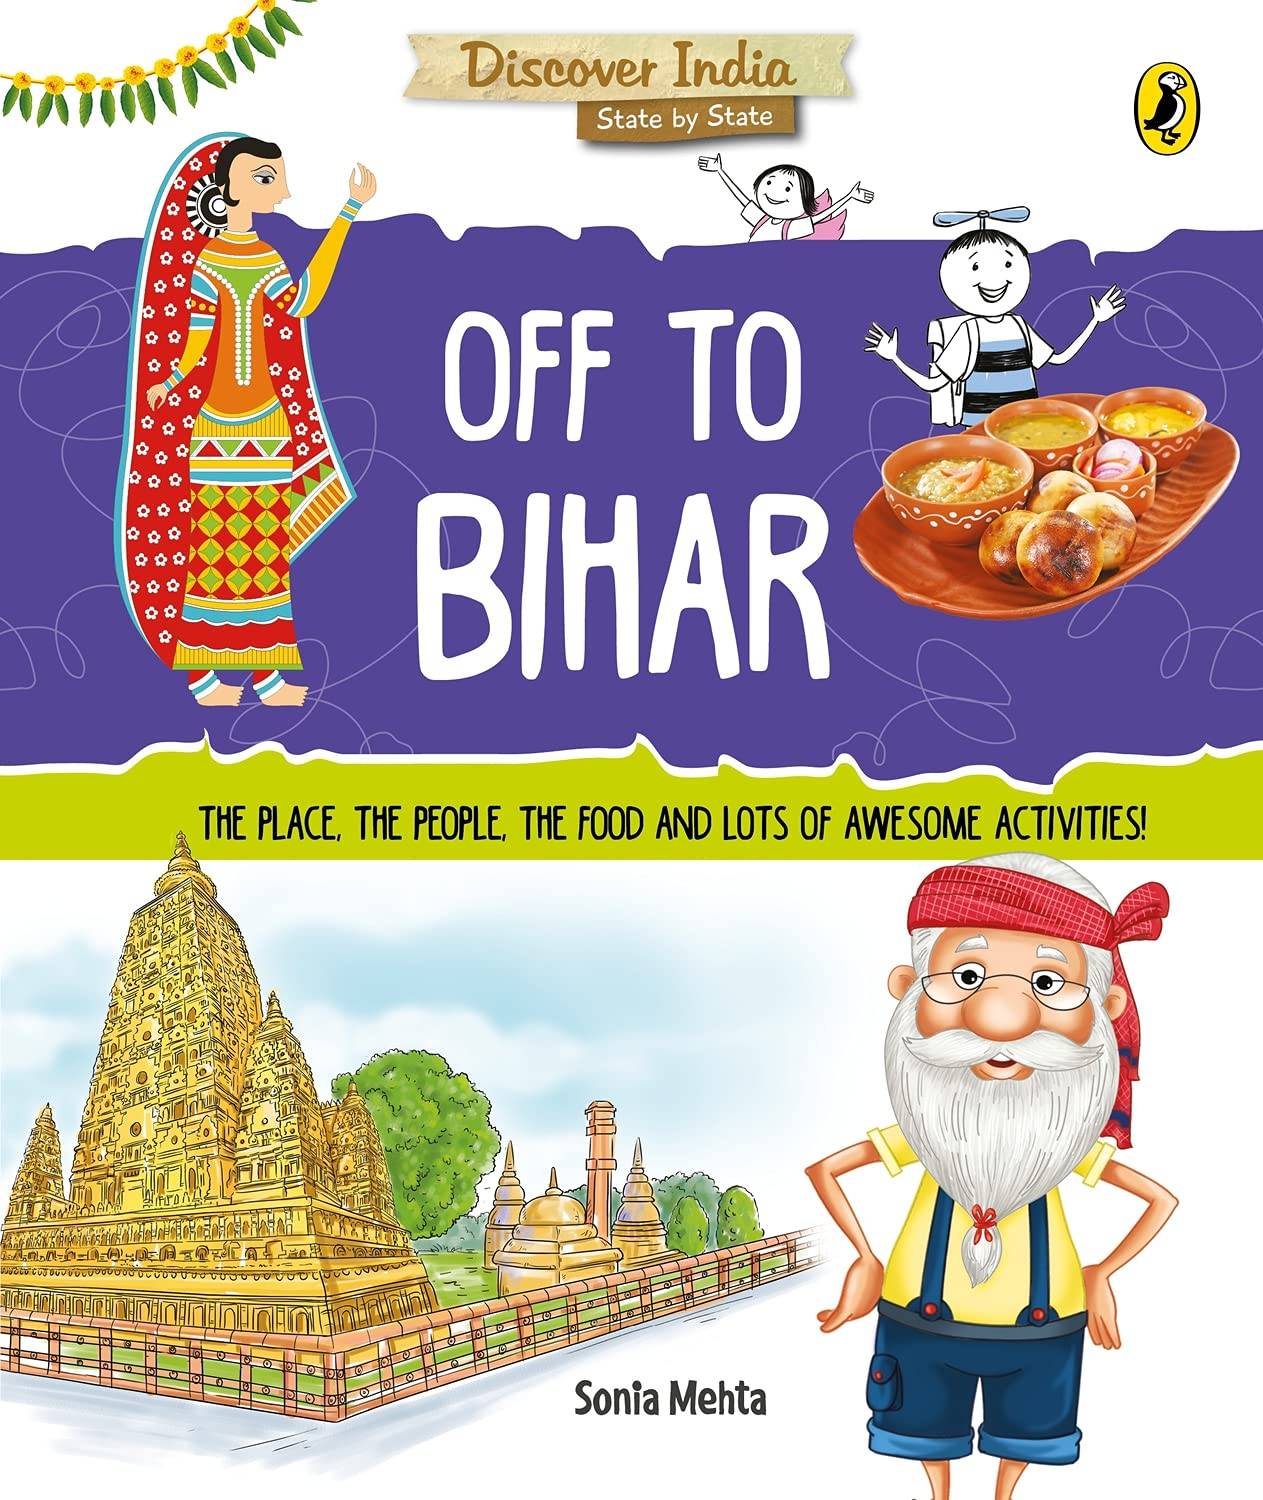 IMG : Discover India- Off to Bihar